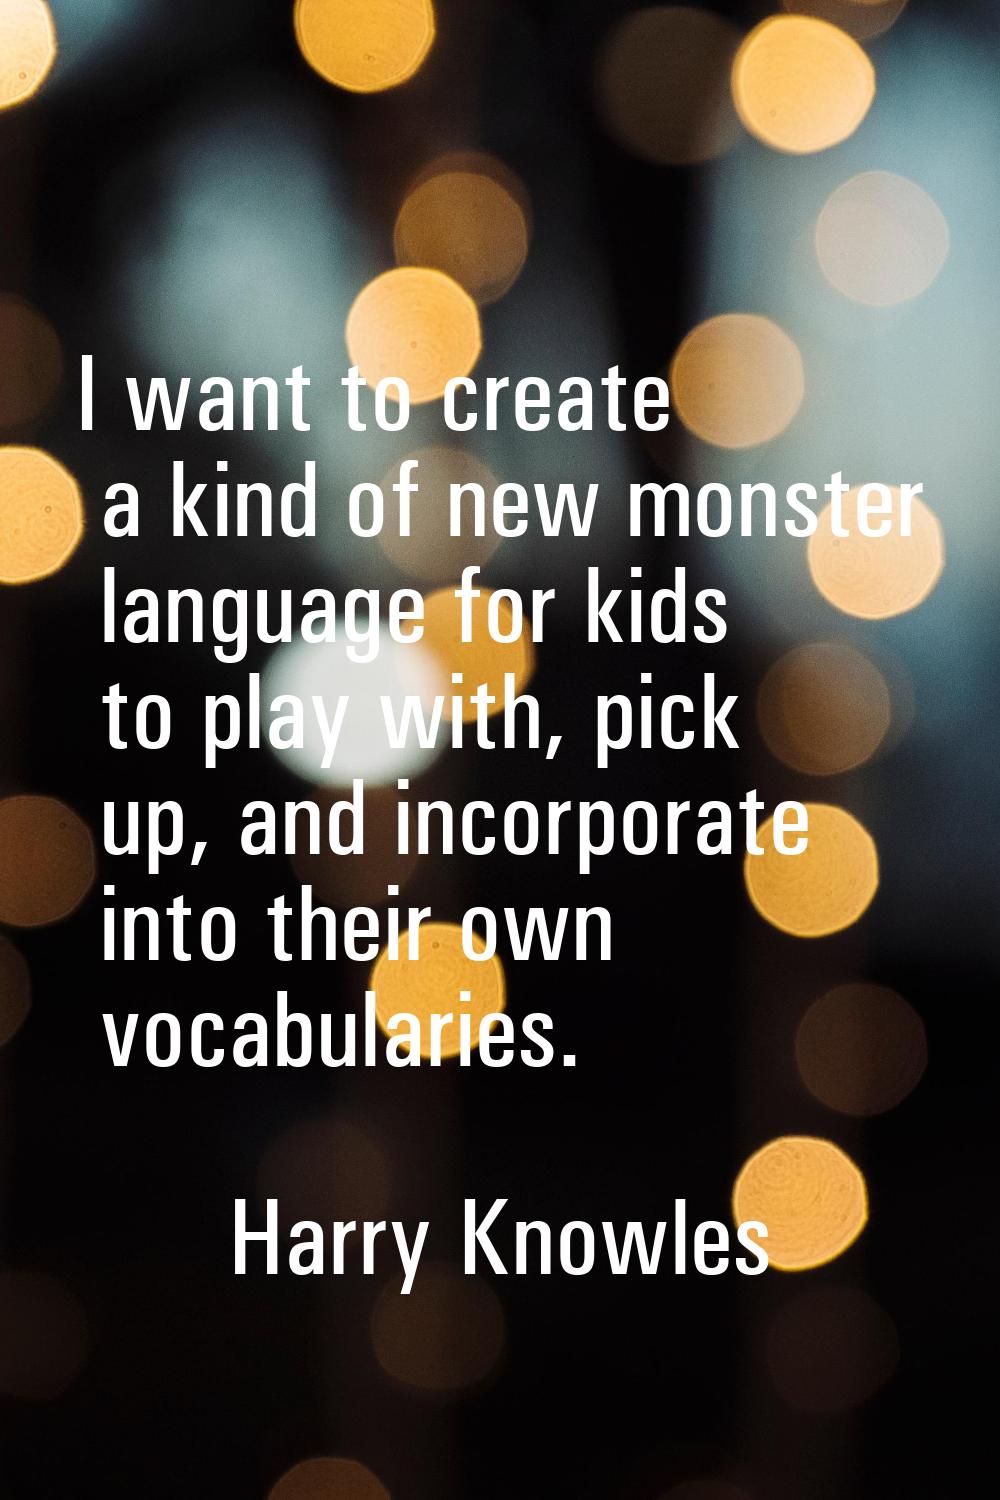 I want to create a kind of new monster language for kids to play with, pick up, and incorporate int